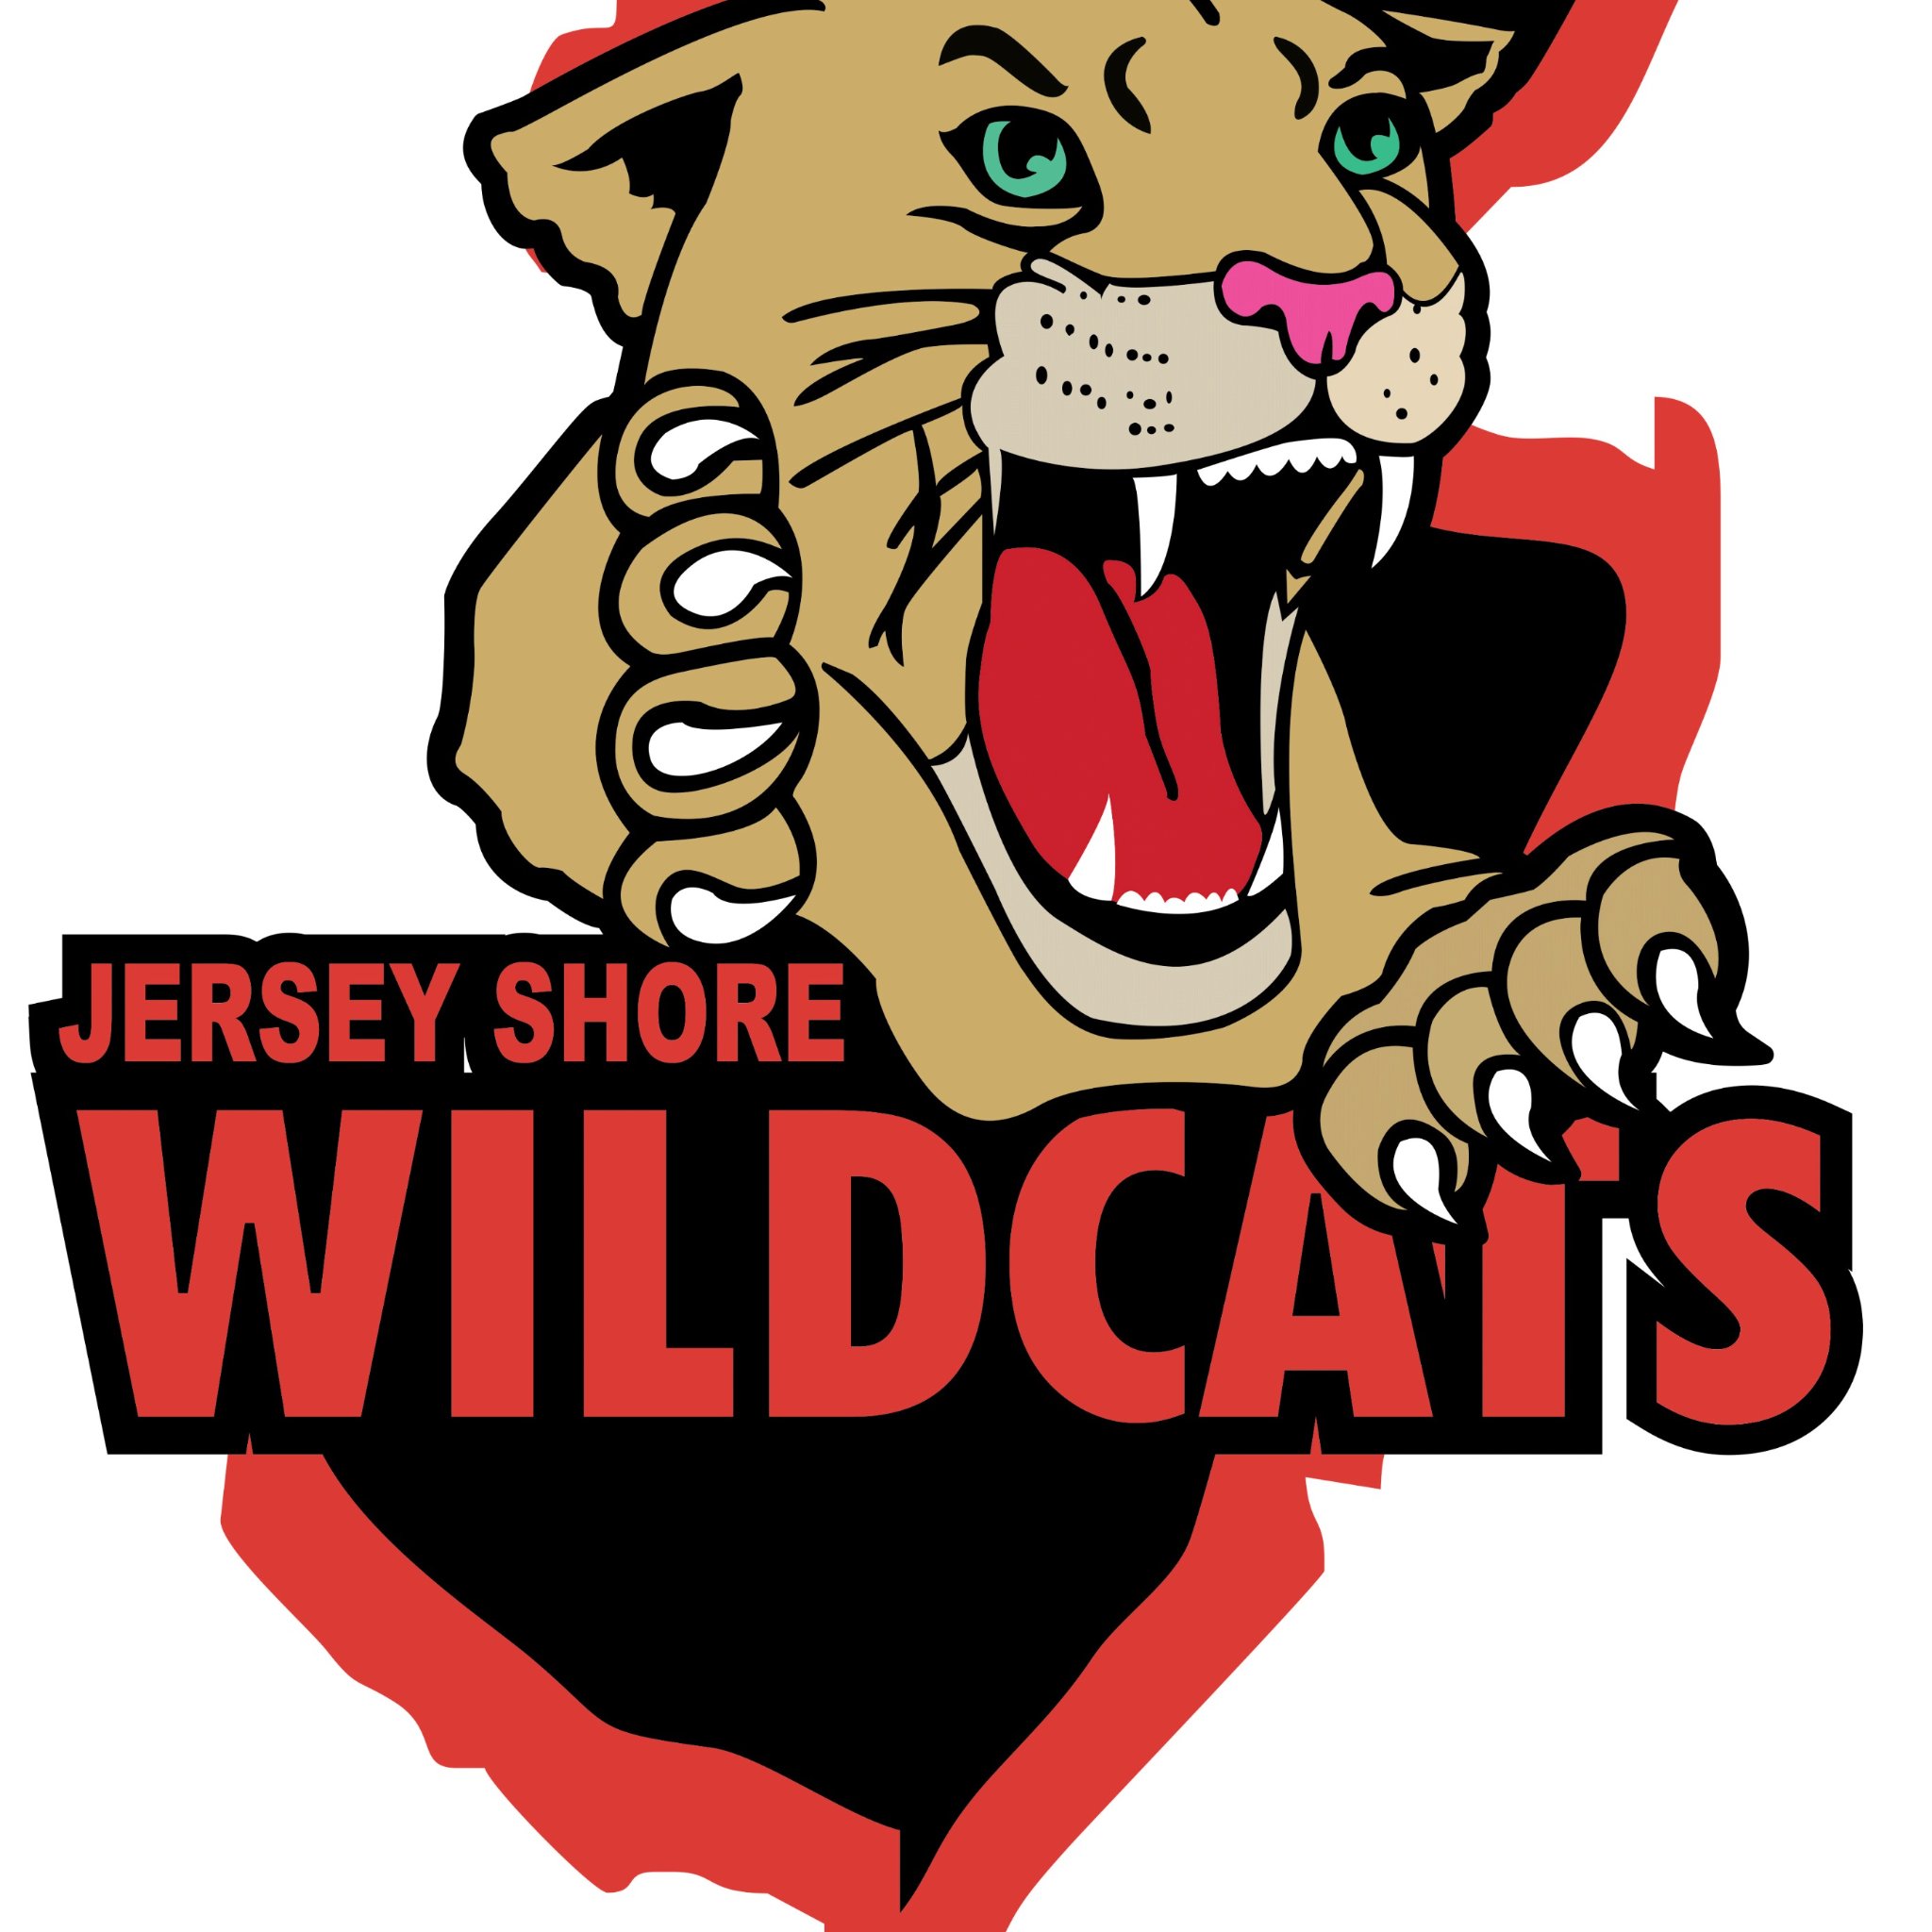 The Jersey Shore Wildcats are members of the NJYHL, USA Hockey & affiliated with the Atlantic District, playing Mite thru Midget age levels.